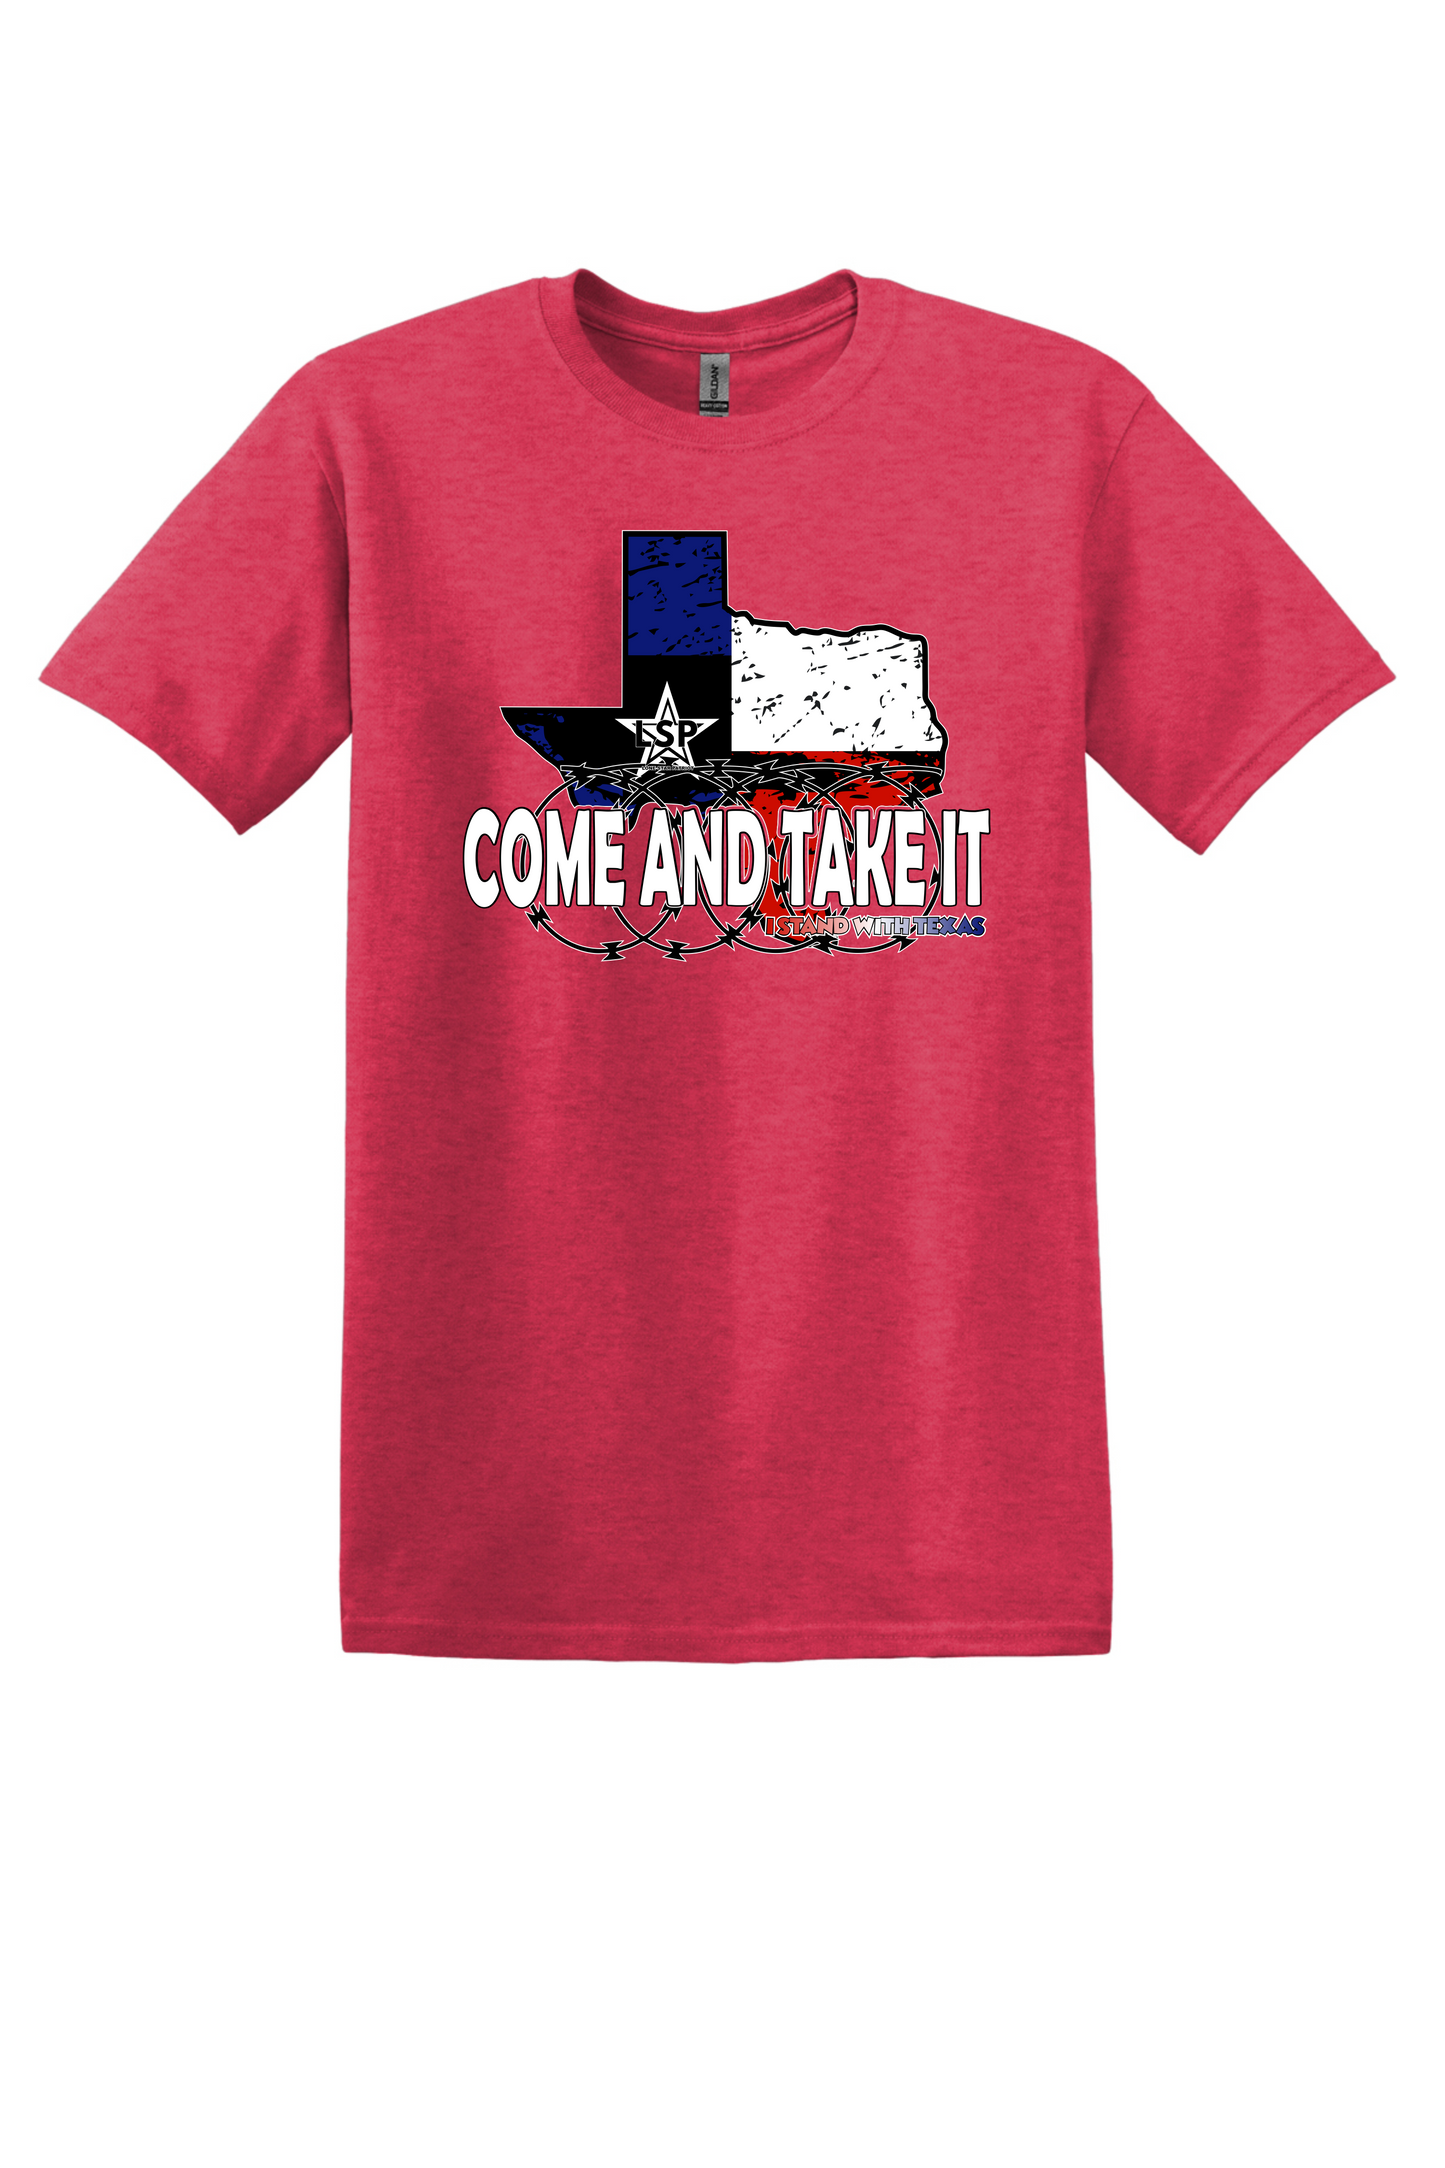 Come and Take it - I stand with Texas